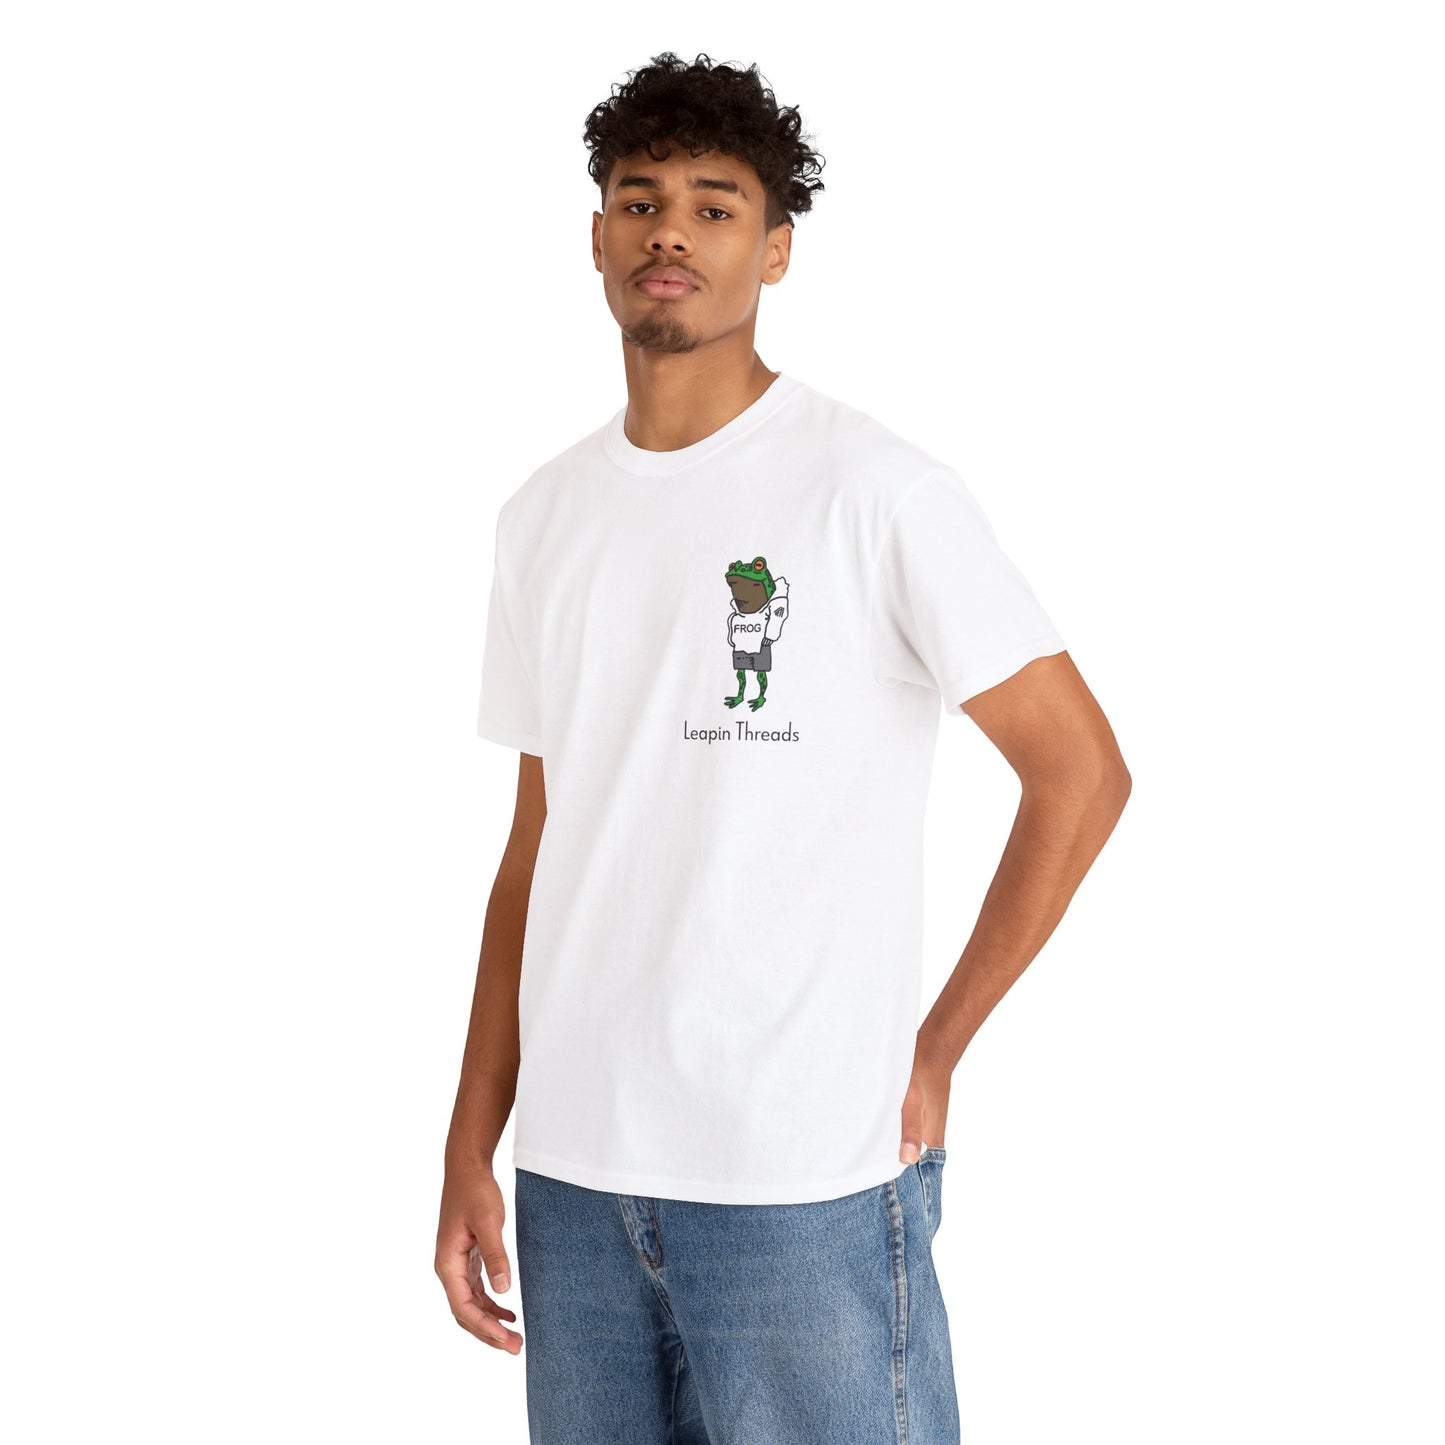 The Funky Frog Tee